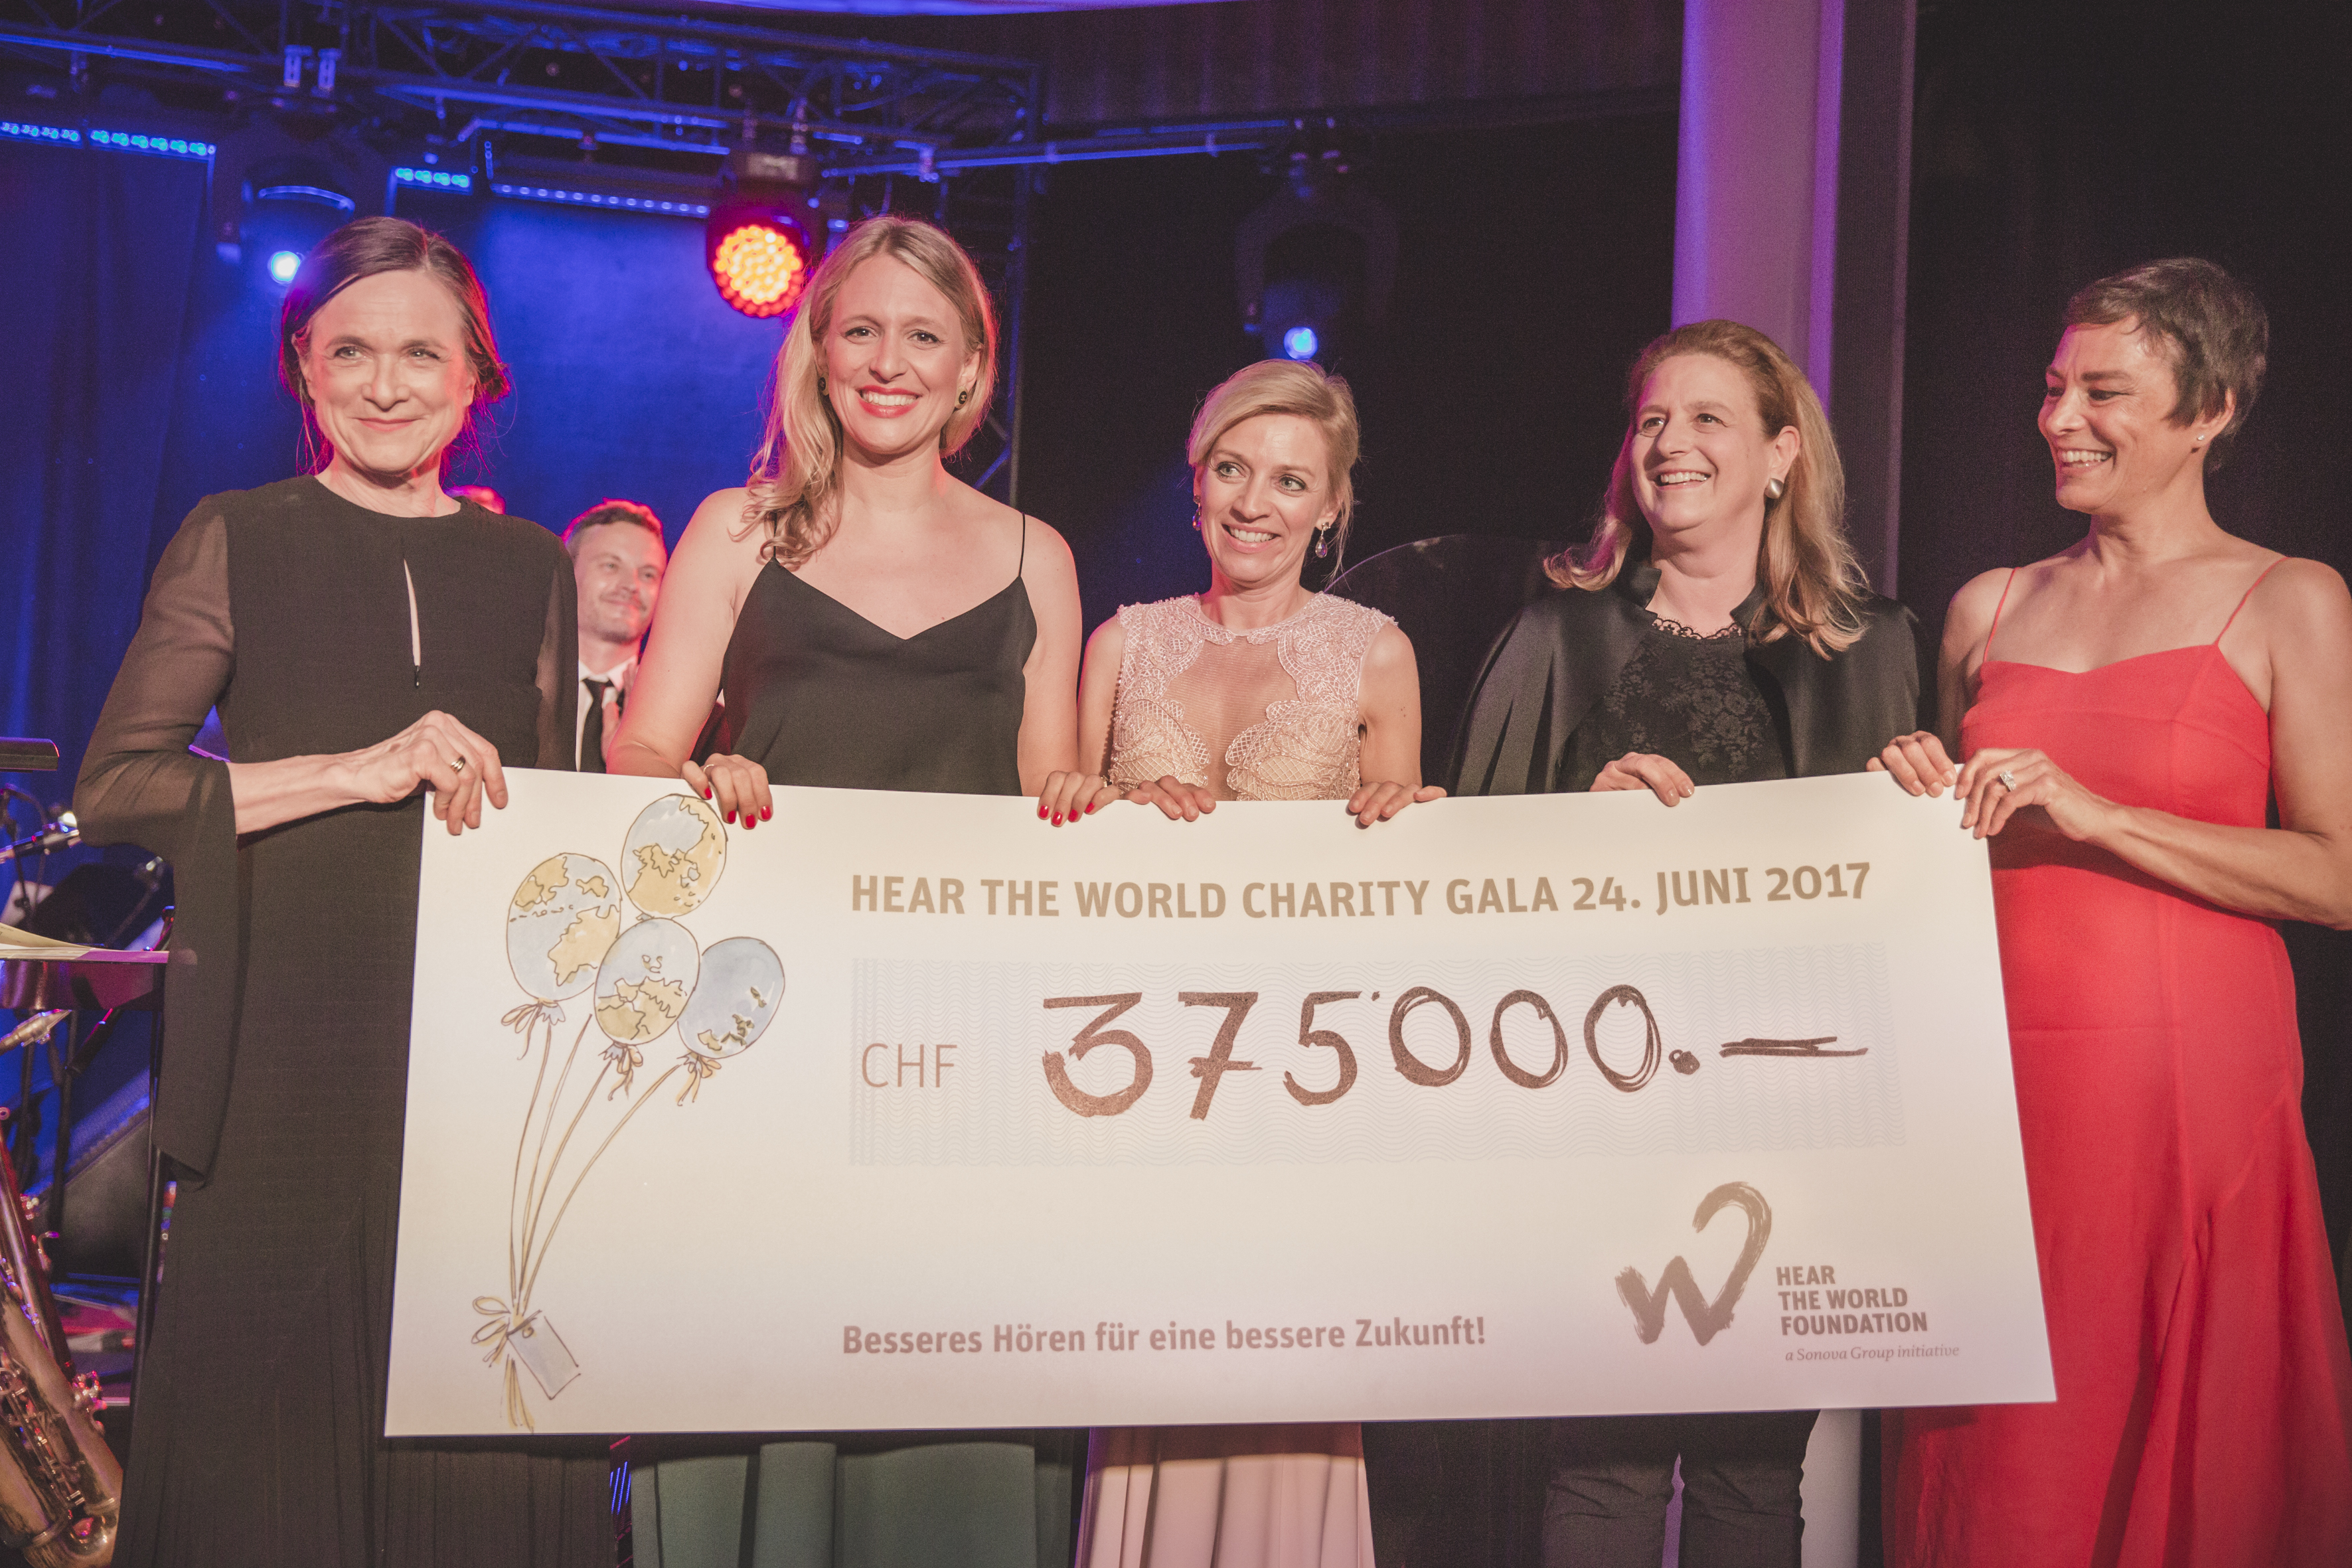 Charity-gala-CHF-375000-for-children-with-hearing-loss-Hear-the-World-Foundation-06